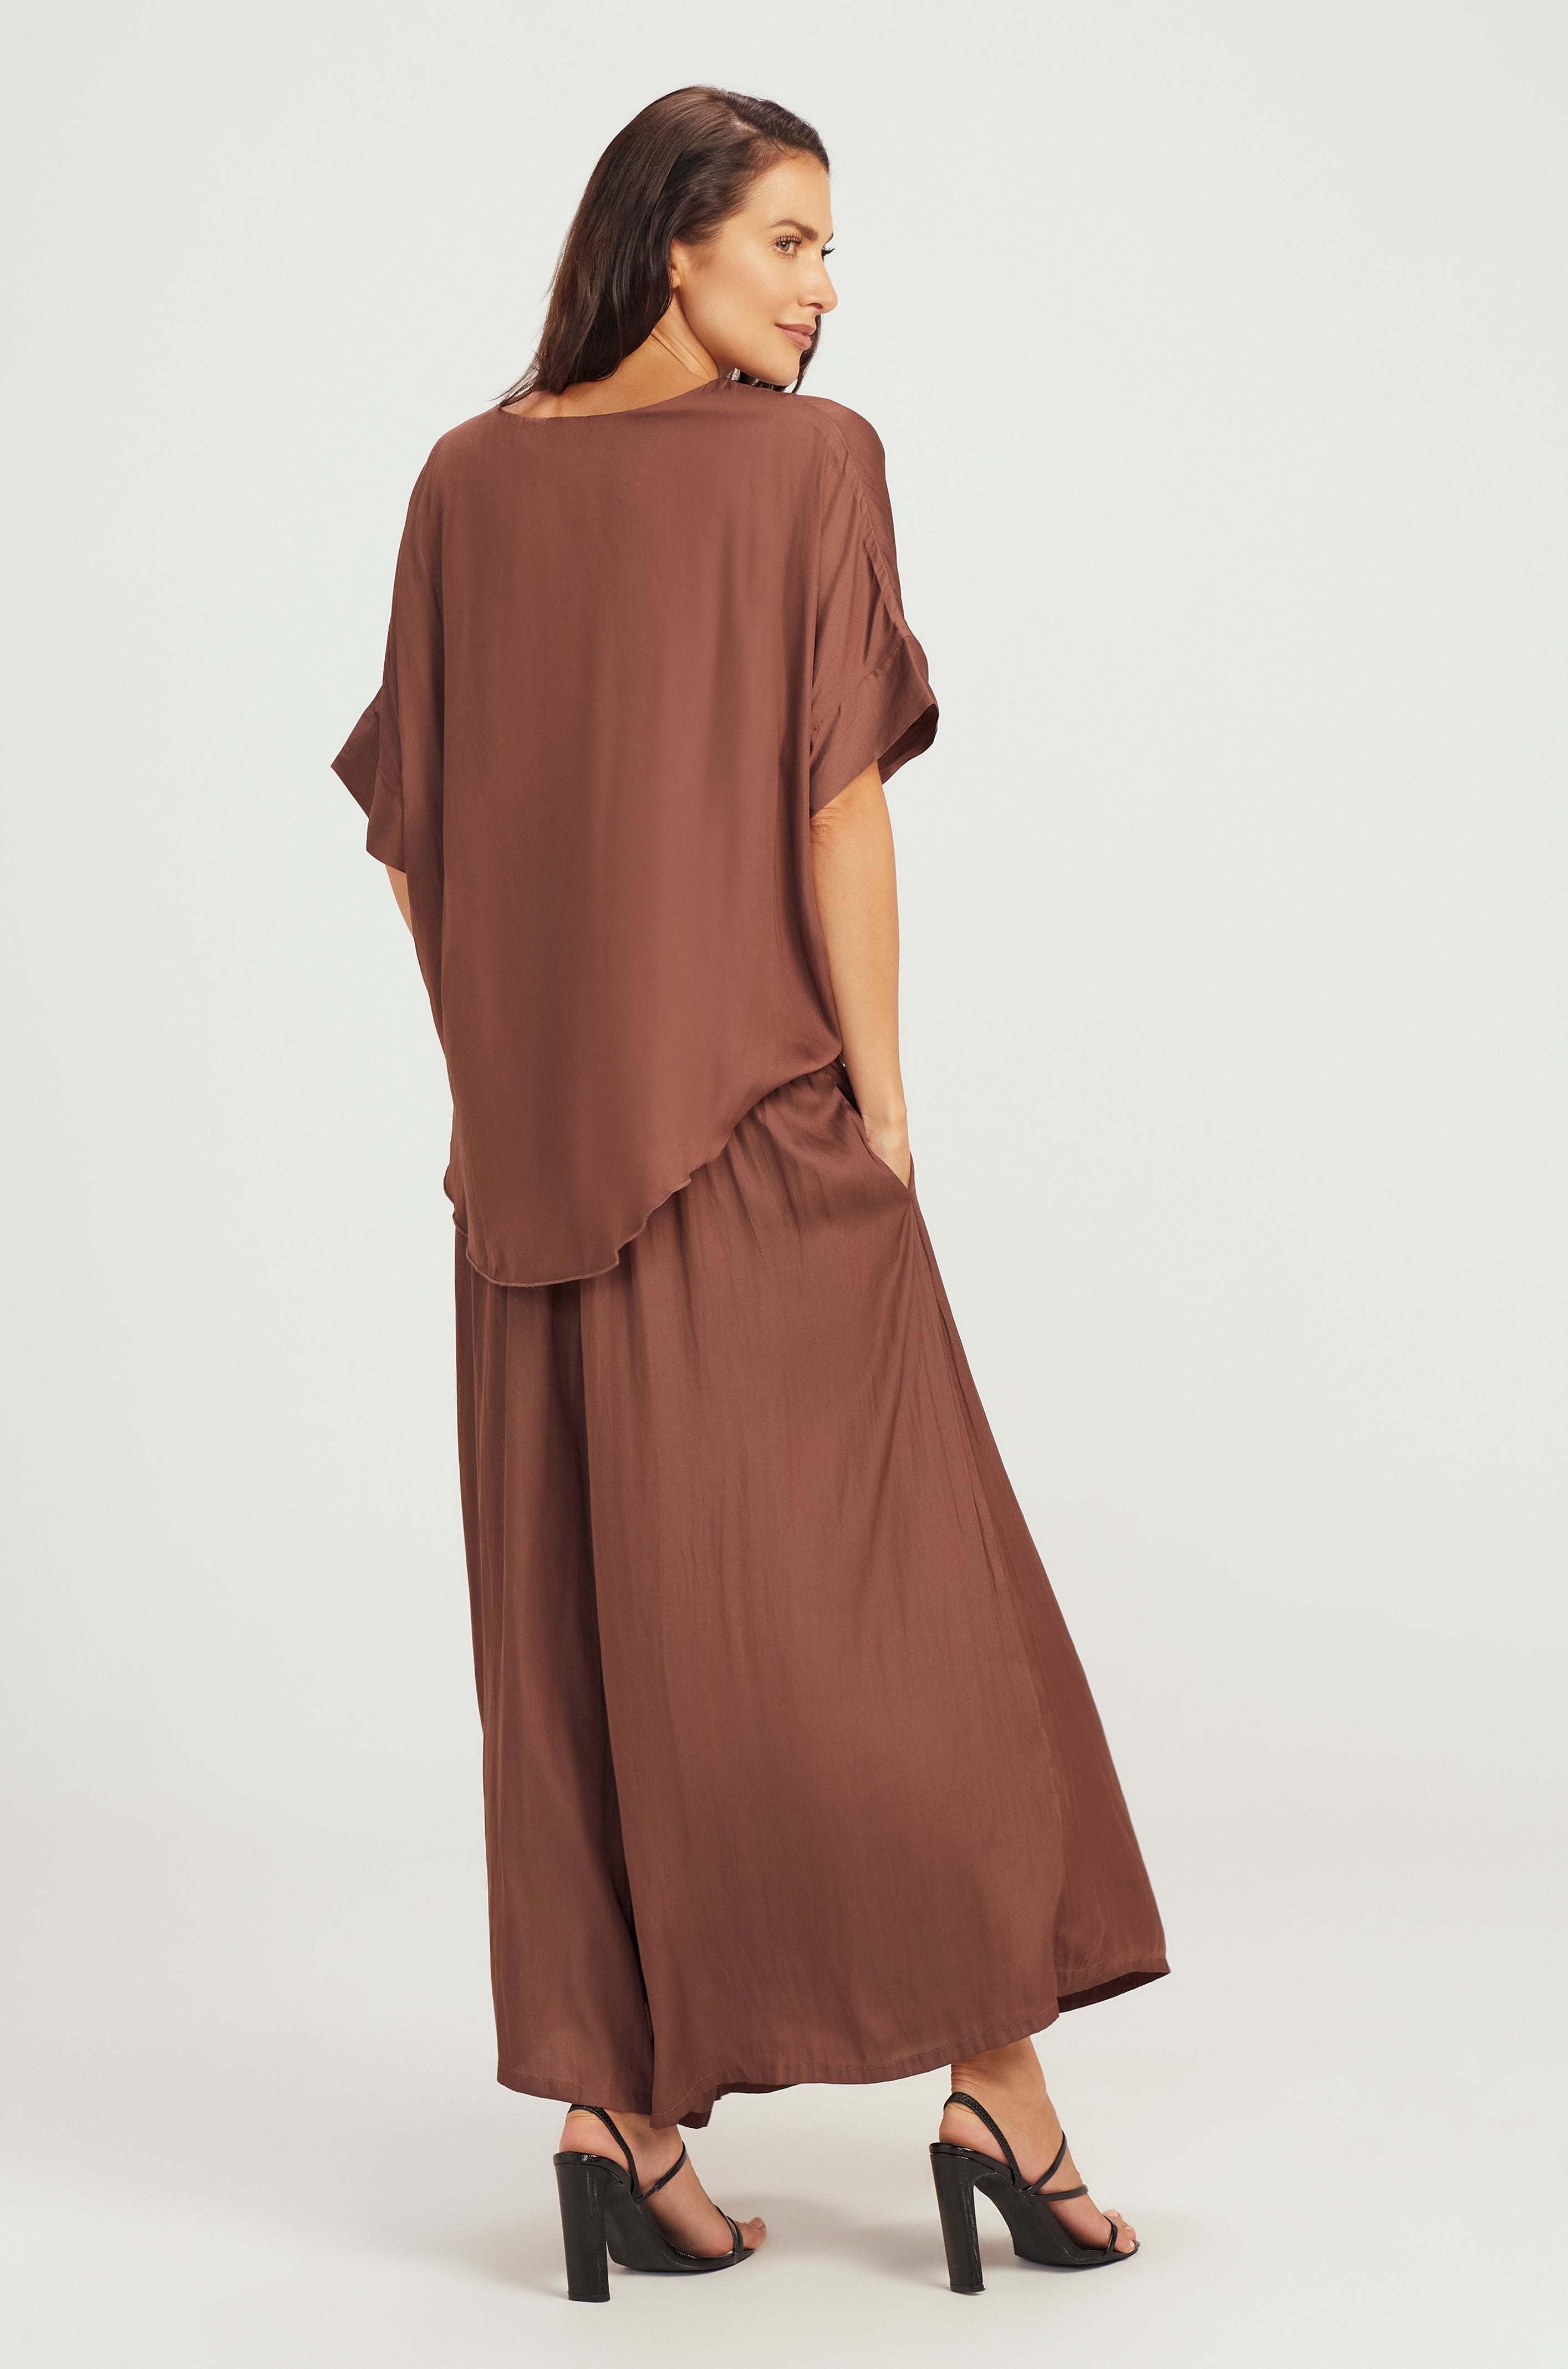 TOPS with attached tank / ROUND NECK - CHOCOLATE /PLUM